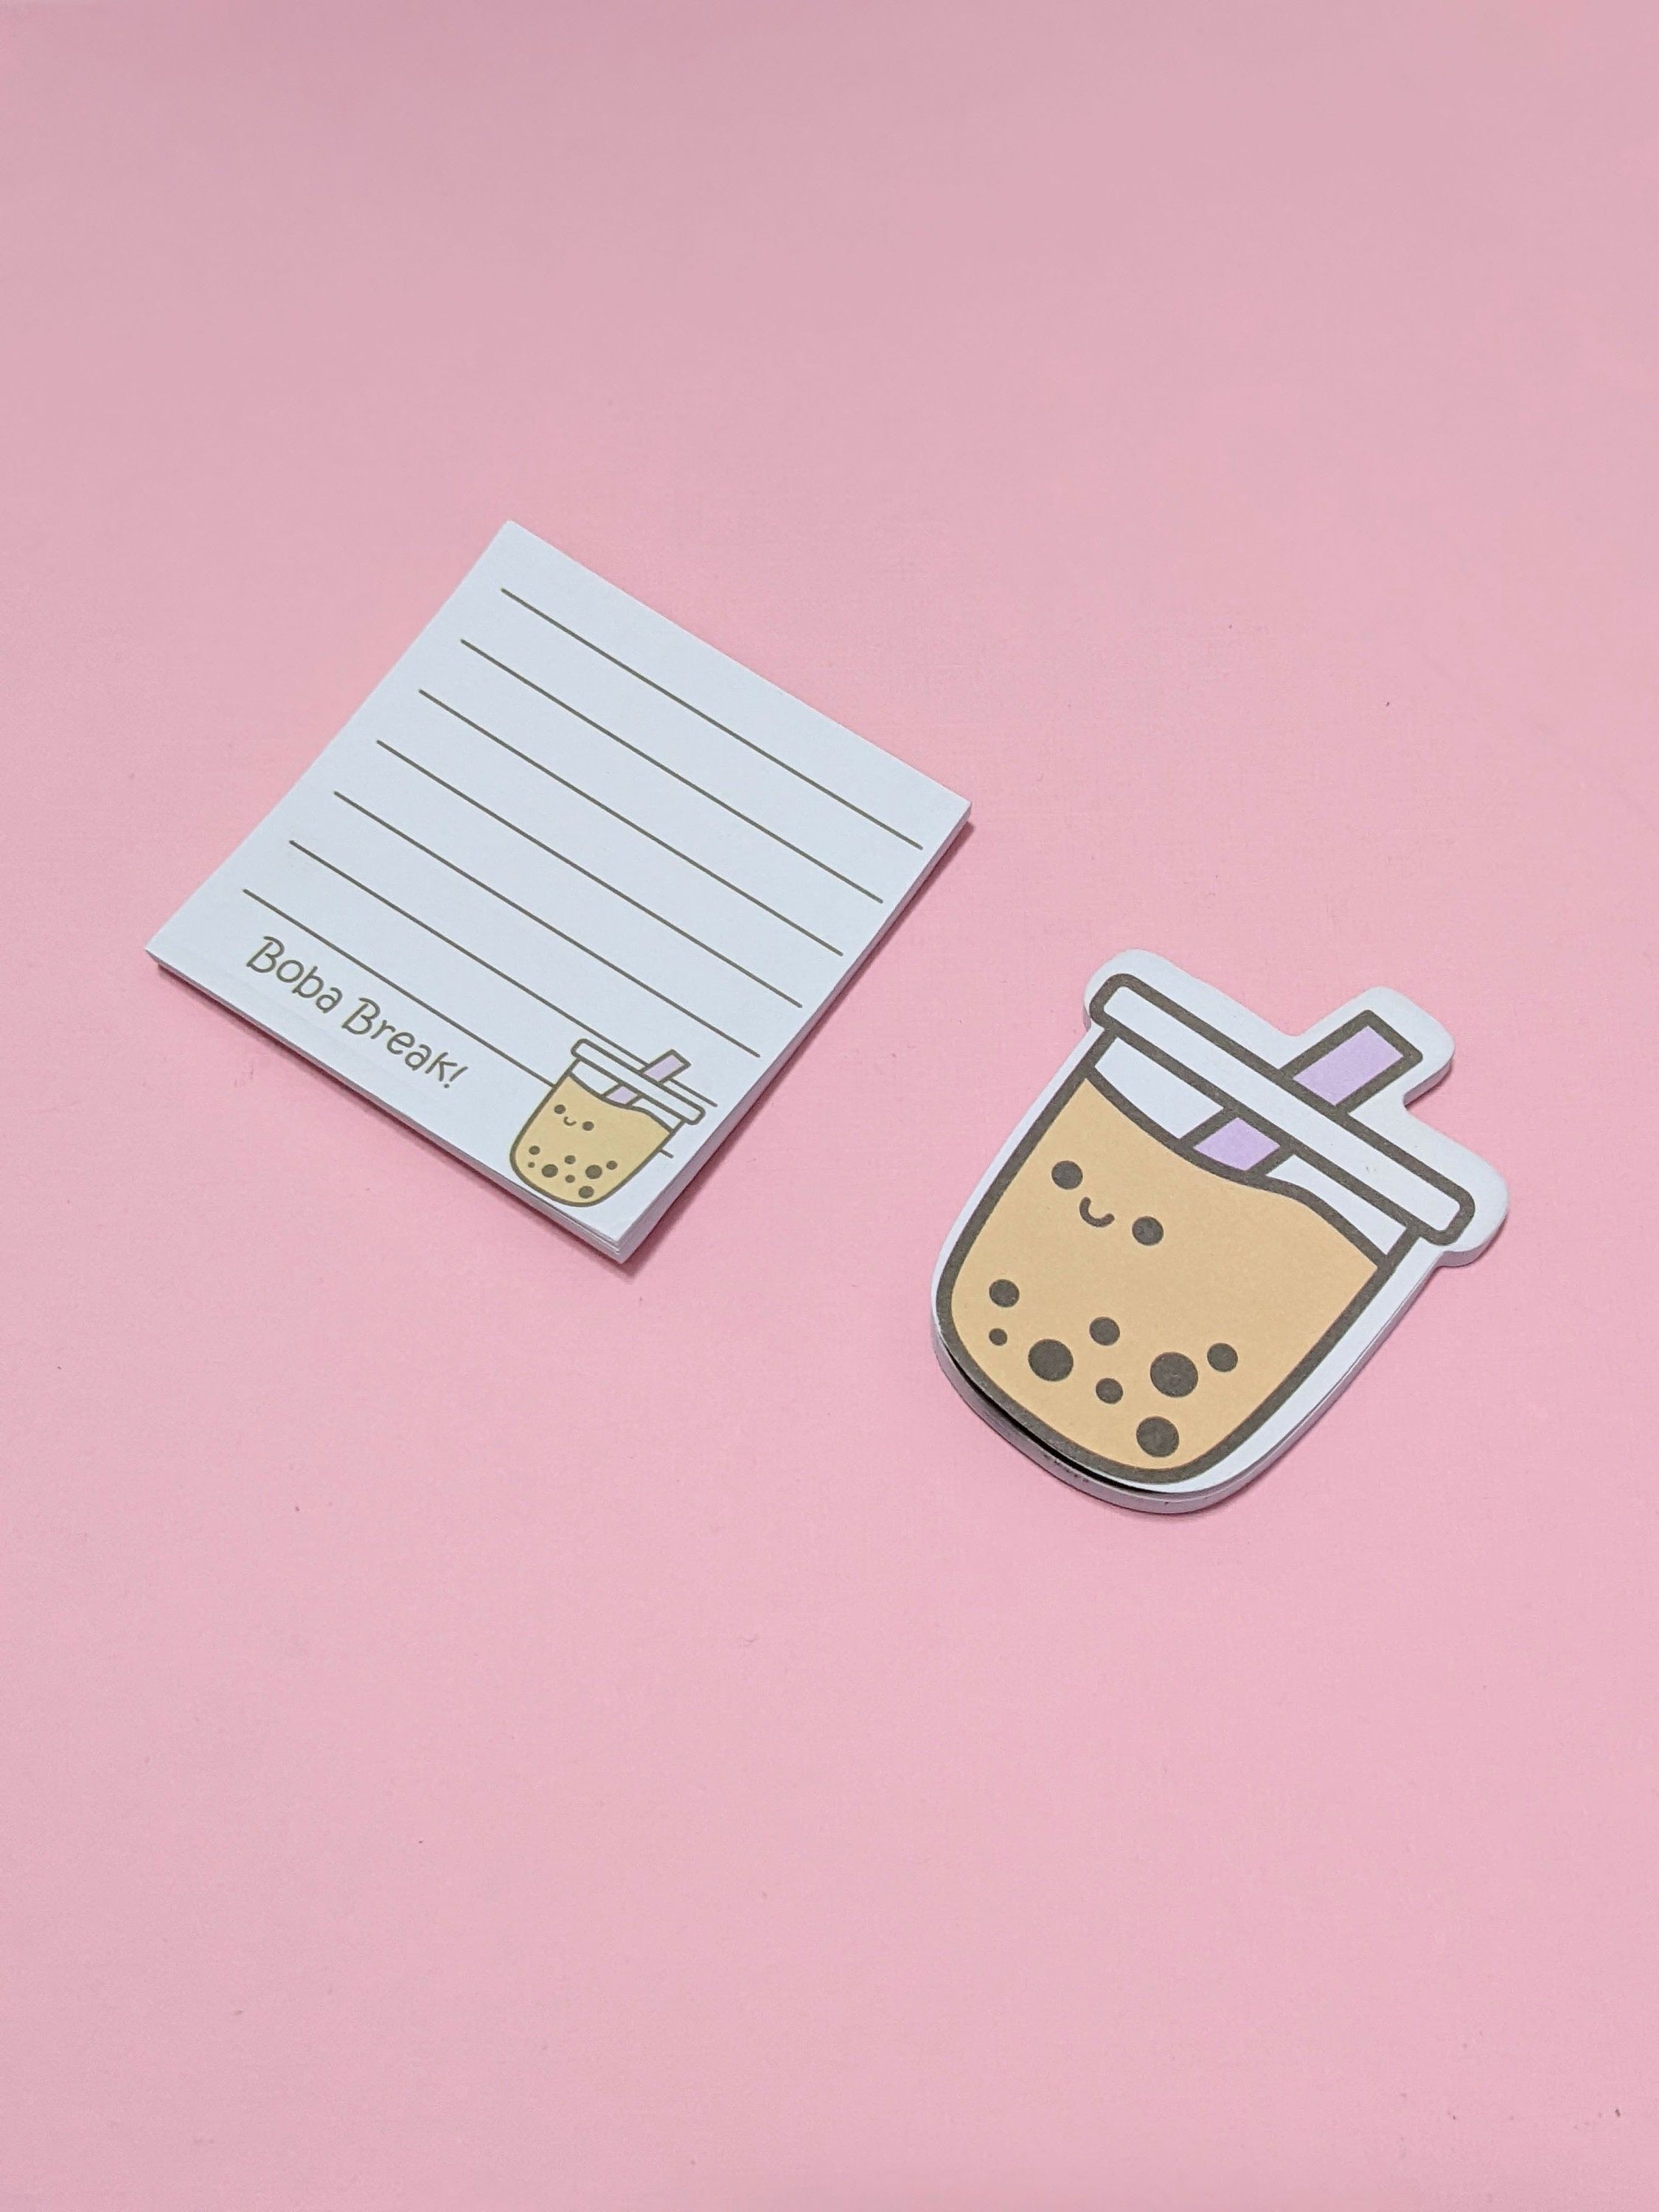 A sticker and a notepad with a boba drink on it - Kawaii